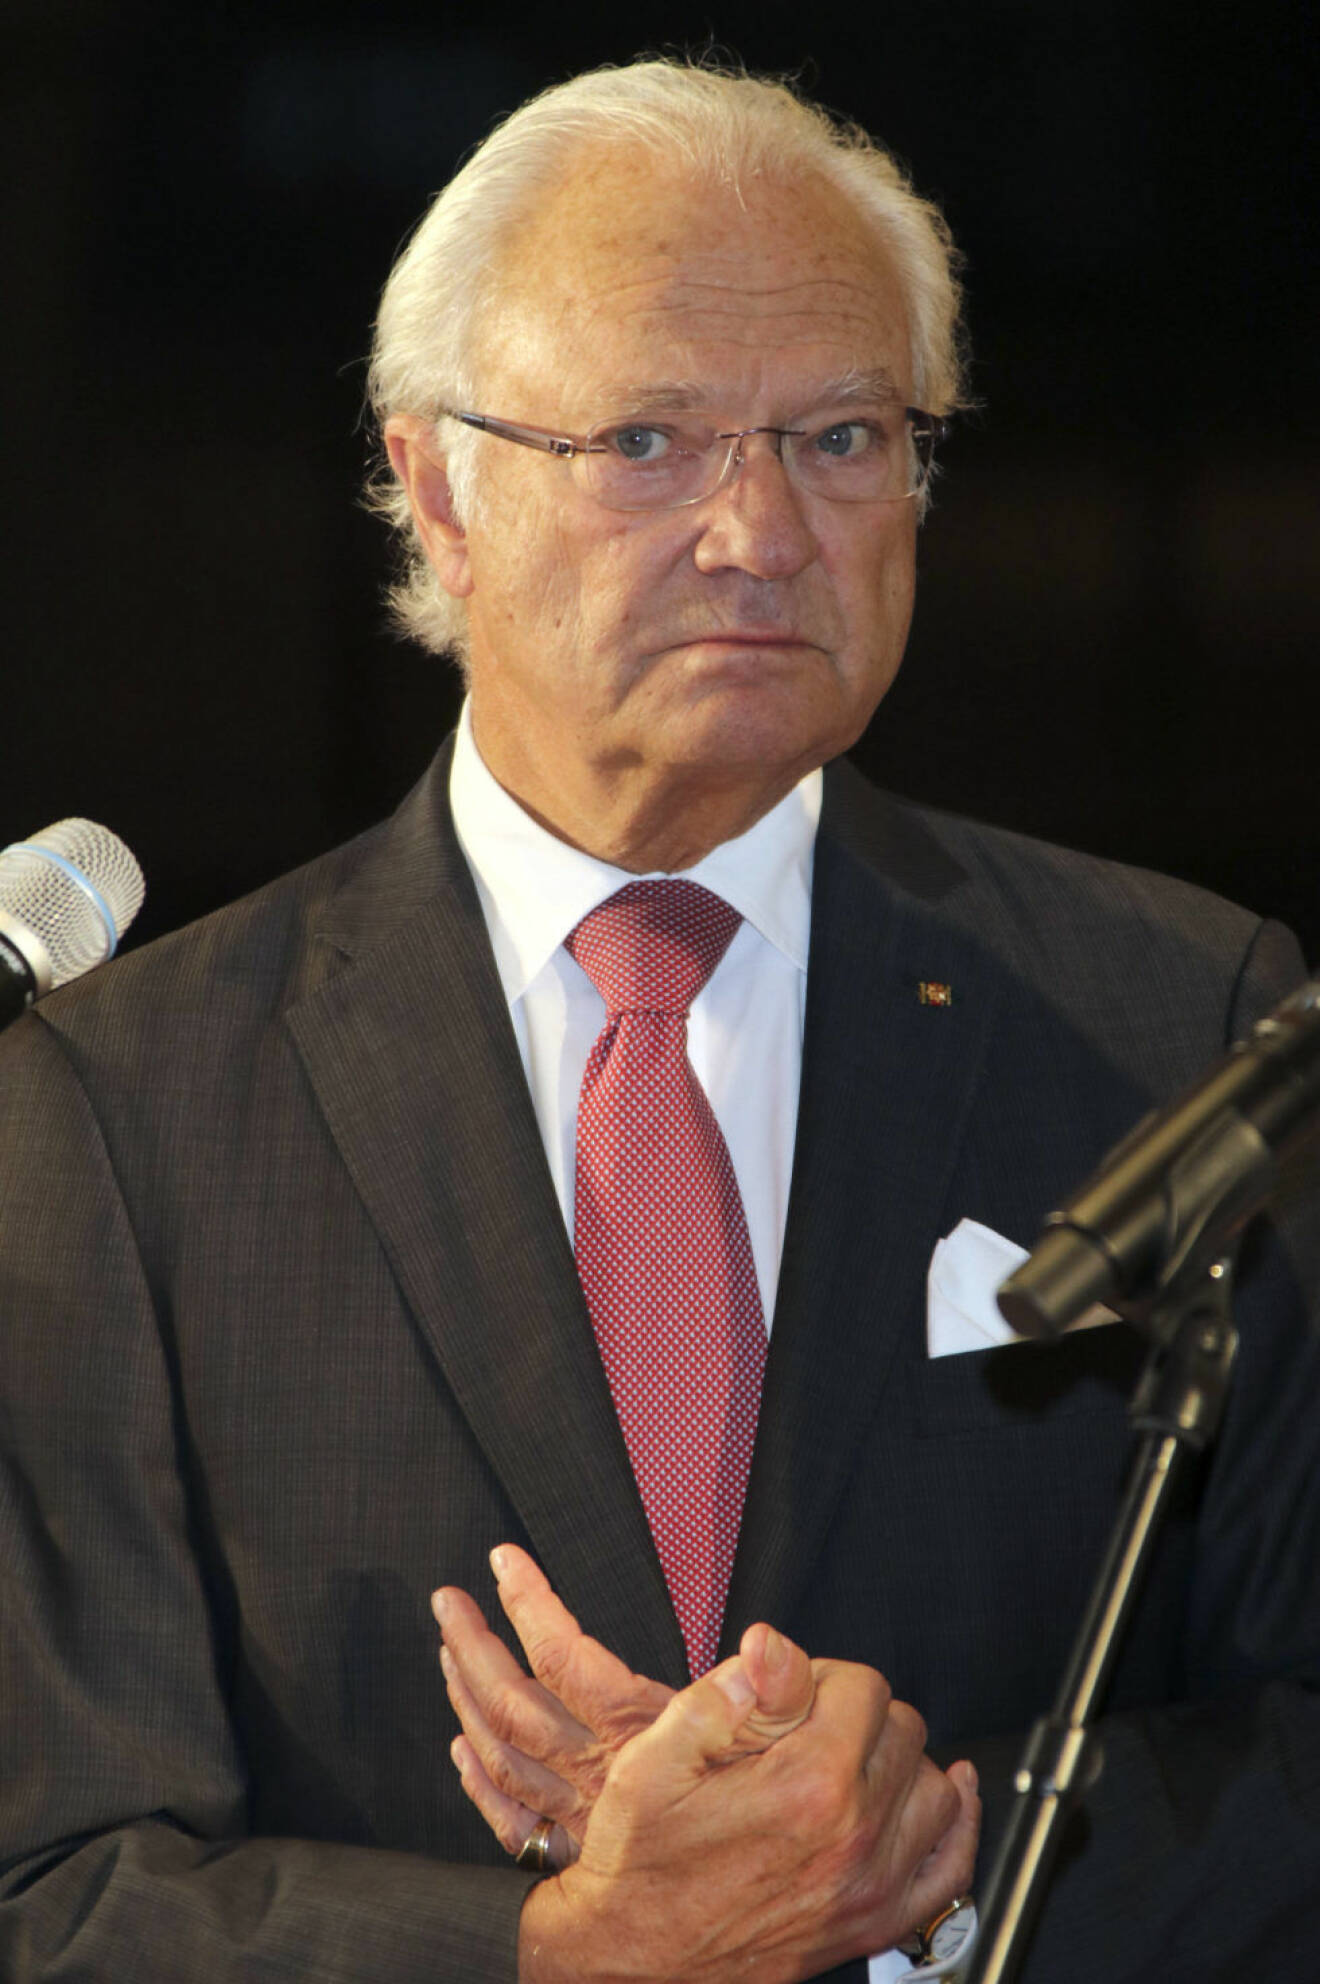 Carl XVI Gustaf of Sweden during a visit to the Elbphilharmonie, a concert hall under construction in the HafenCity quarter of Hamburg, Germany. Featuring: Carl XVI Gustaf of Sweden Where: Hamburg, Germany When: 06 Oct 2016 Credit: gbrci/Future Image/WENN.com **Not available for publication in Germany, Poland, Russia, Hungary, Slovenia, Czech Republic, Serbia, Croatia, Slovakia**